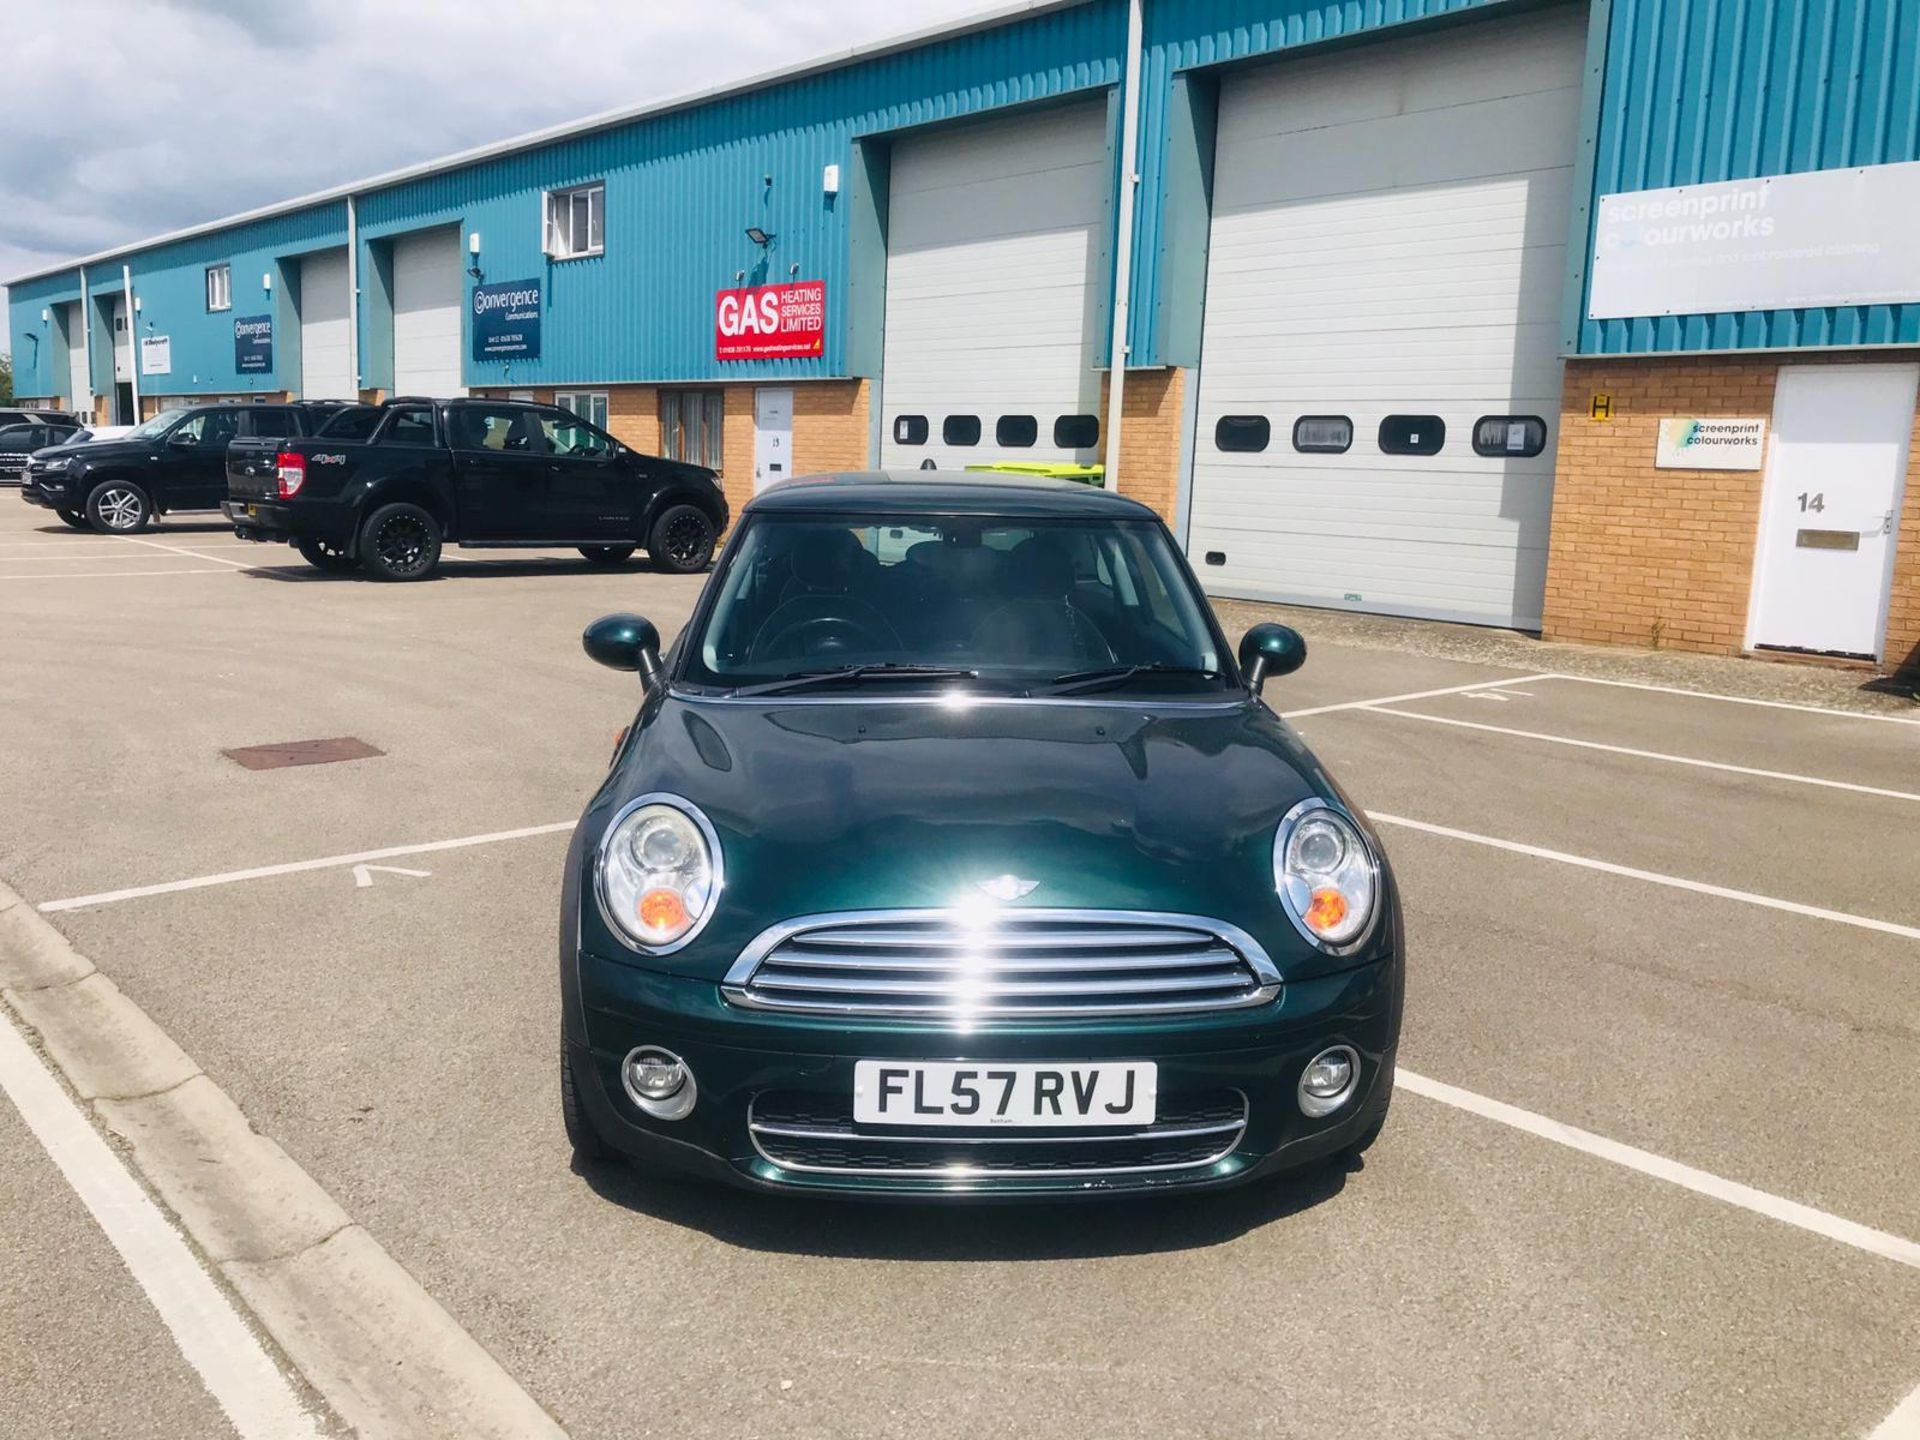 Mini Cooper 1.6 D Hatchback - 2008 Model - Full Leather - Air Con - Heated Screen - Cruise Control - Image 4 of 27